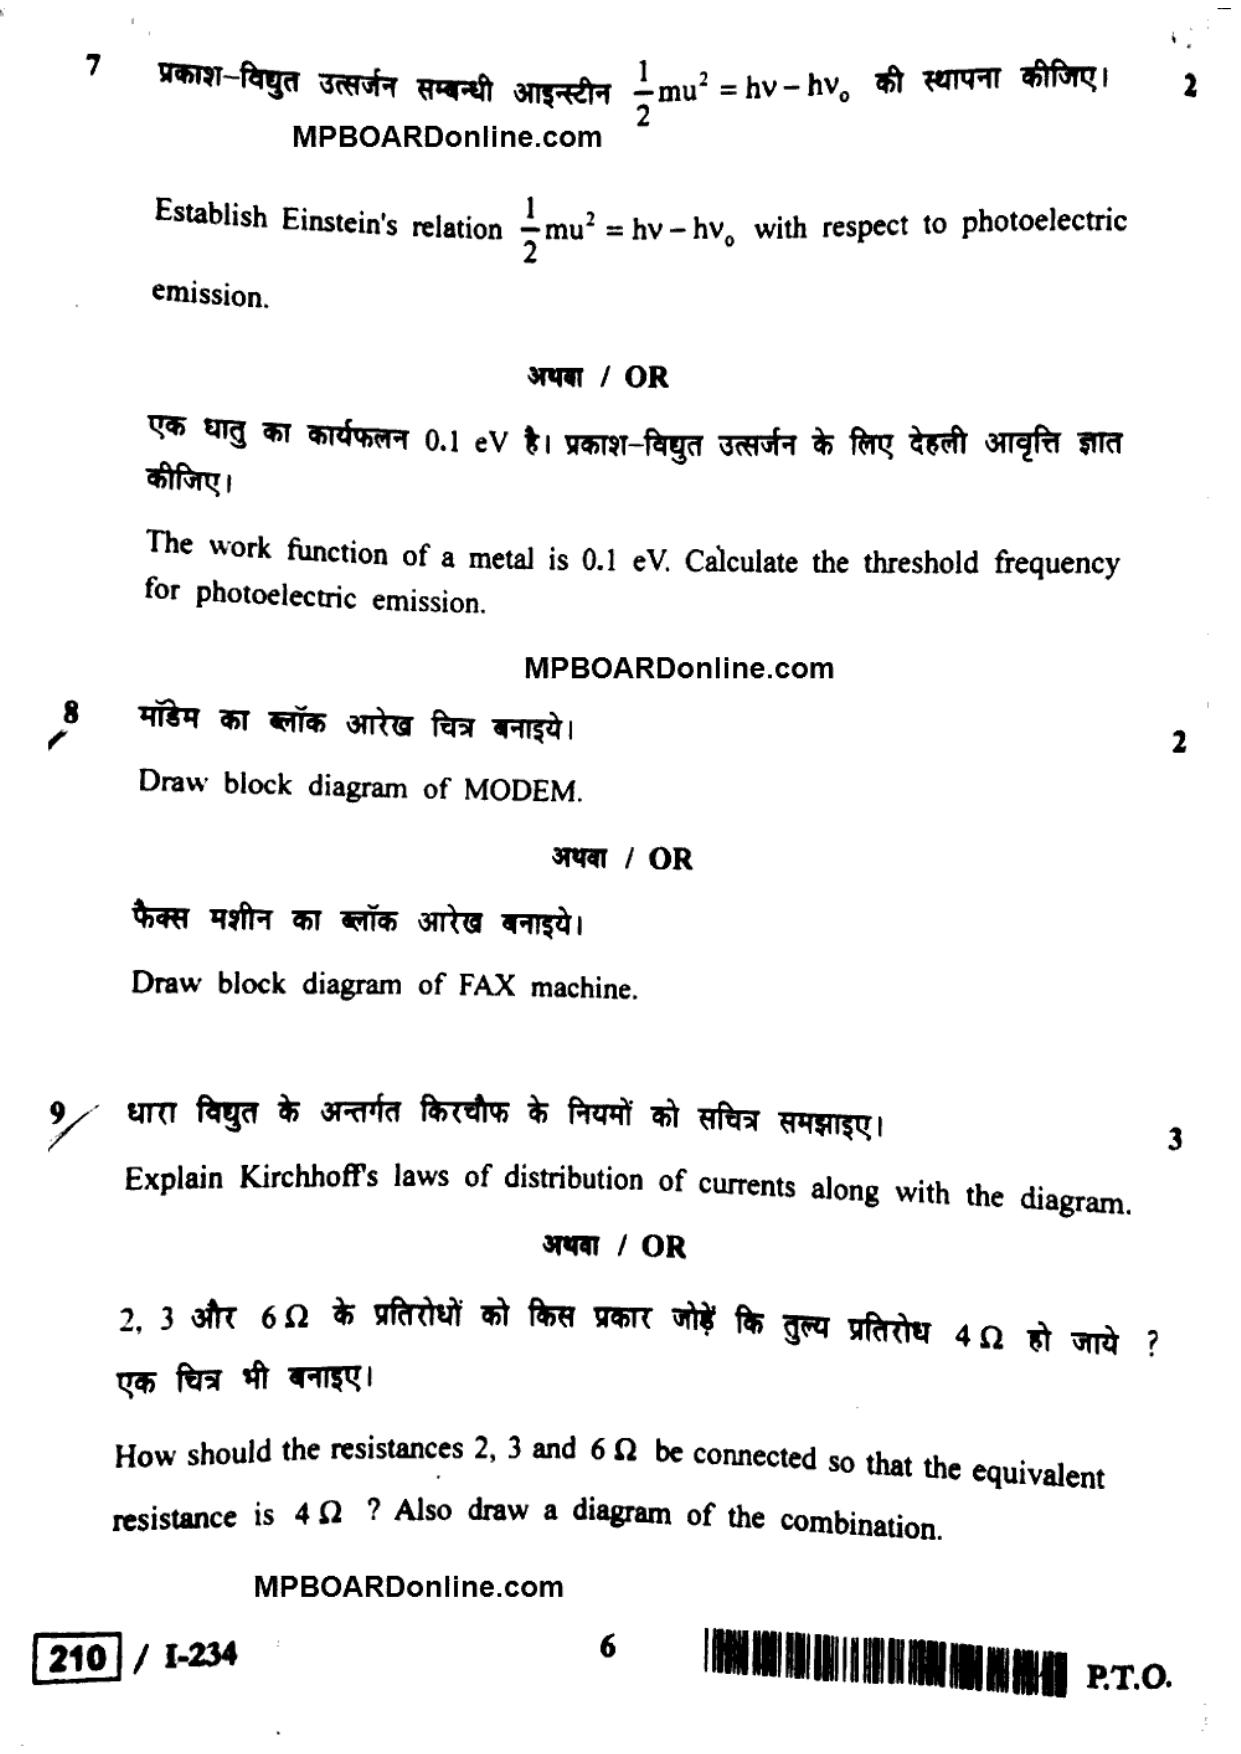 MP Board Class 12 Physics 2018 Question Paper - Page 6